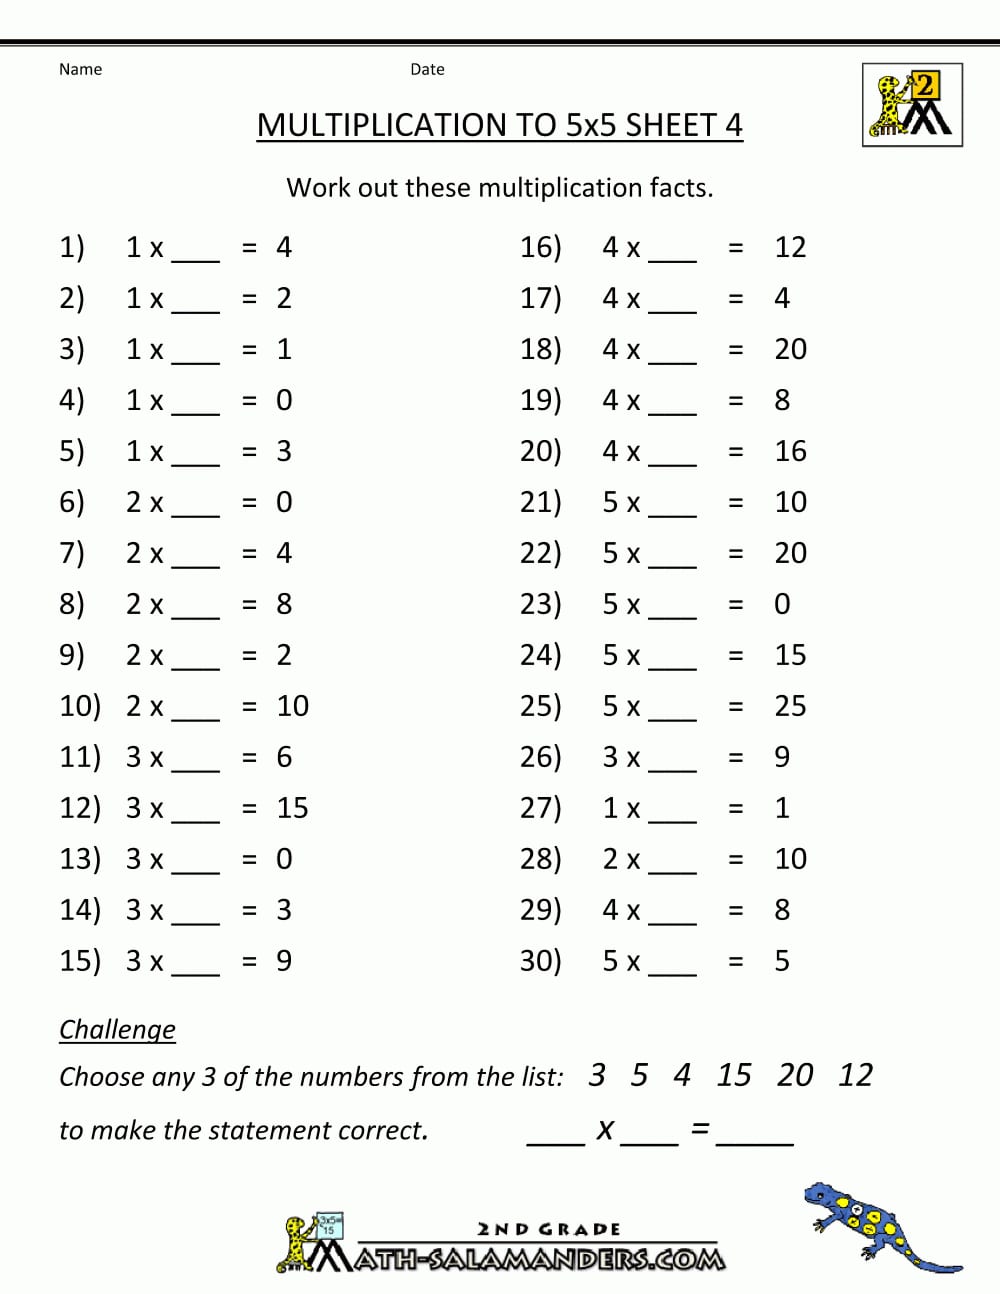 Multiplication Practice Worksheets To 5X5 In Math Facts Practice Worksheets Multiplication